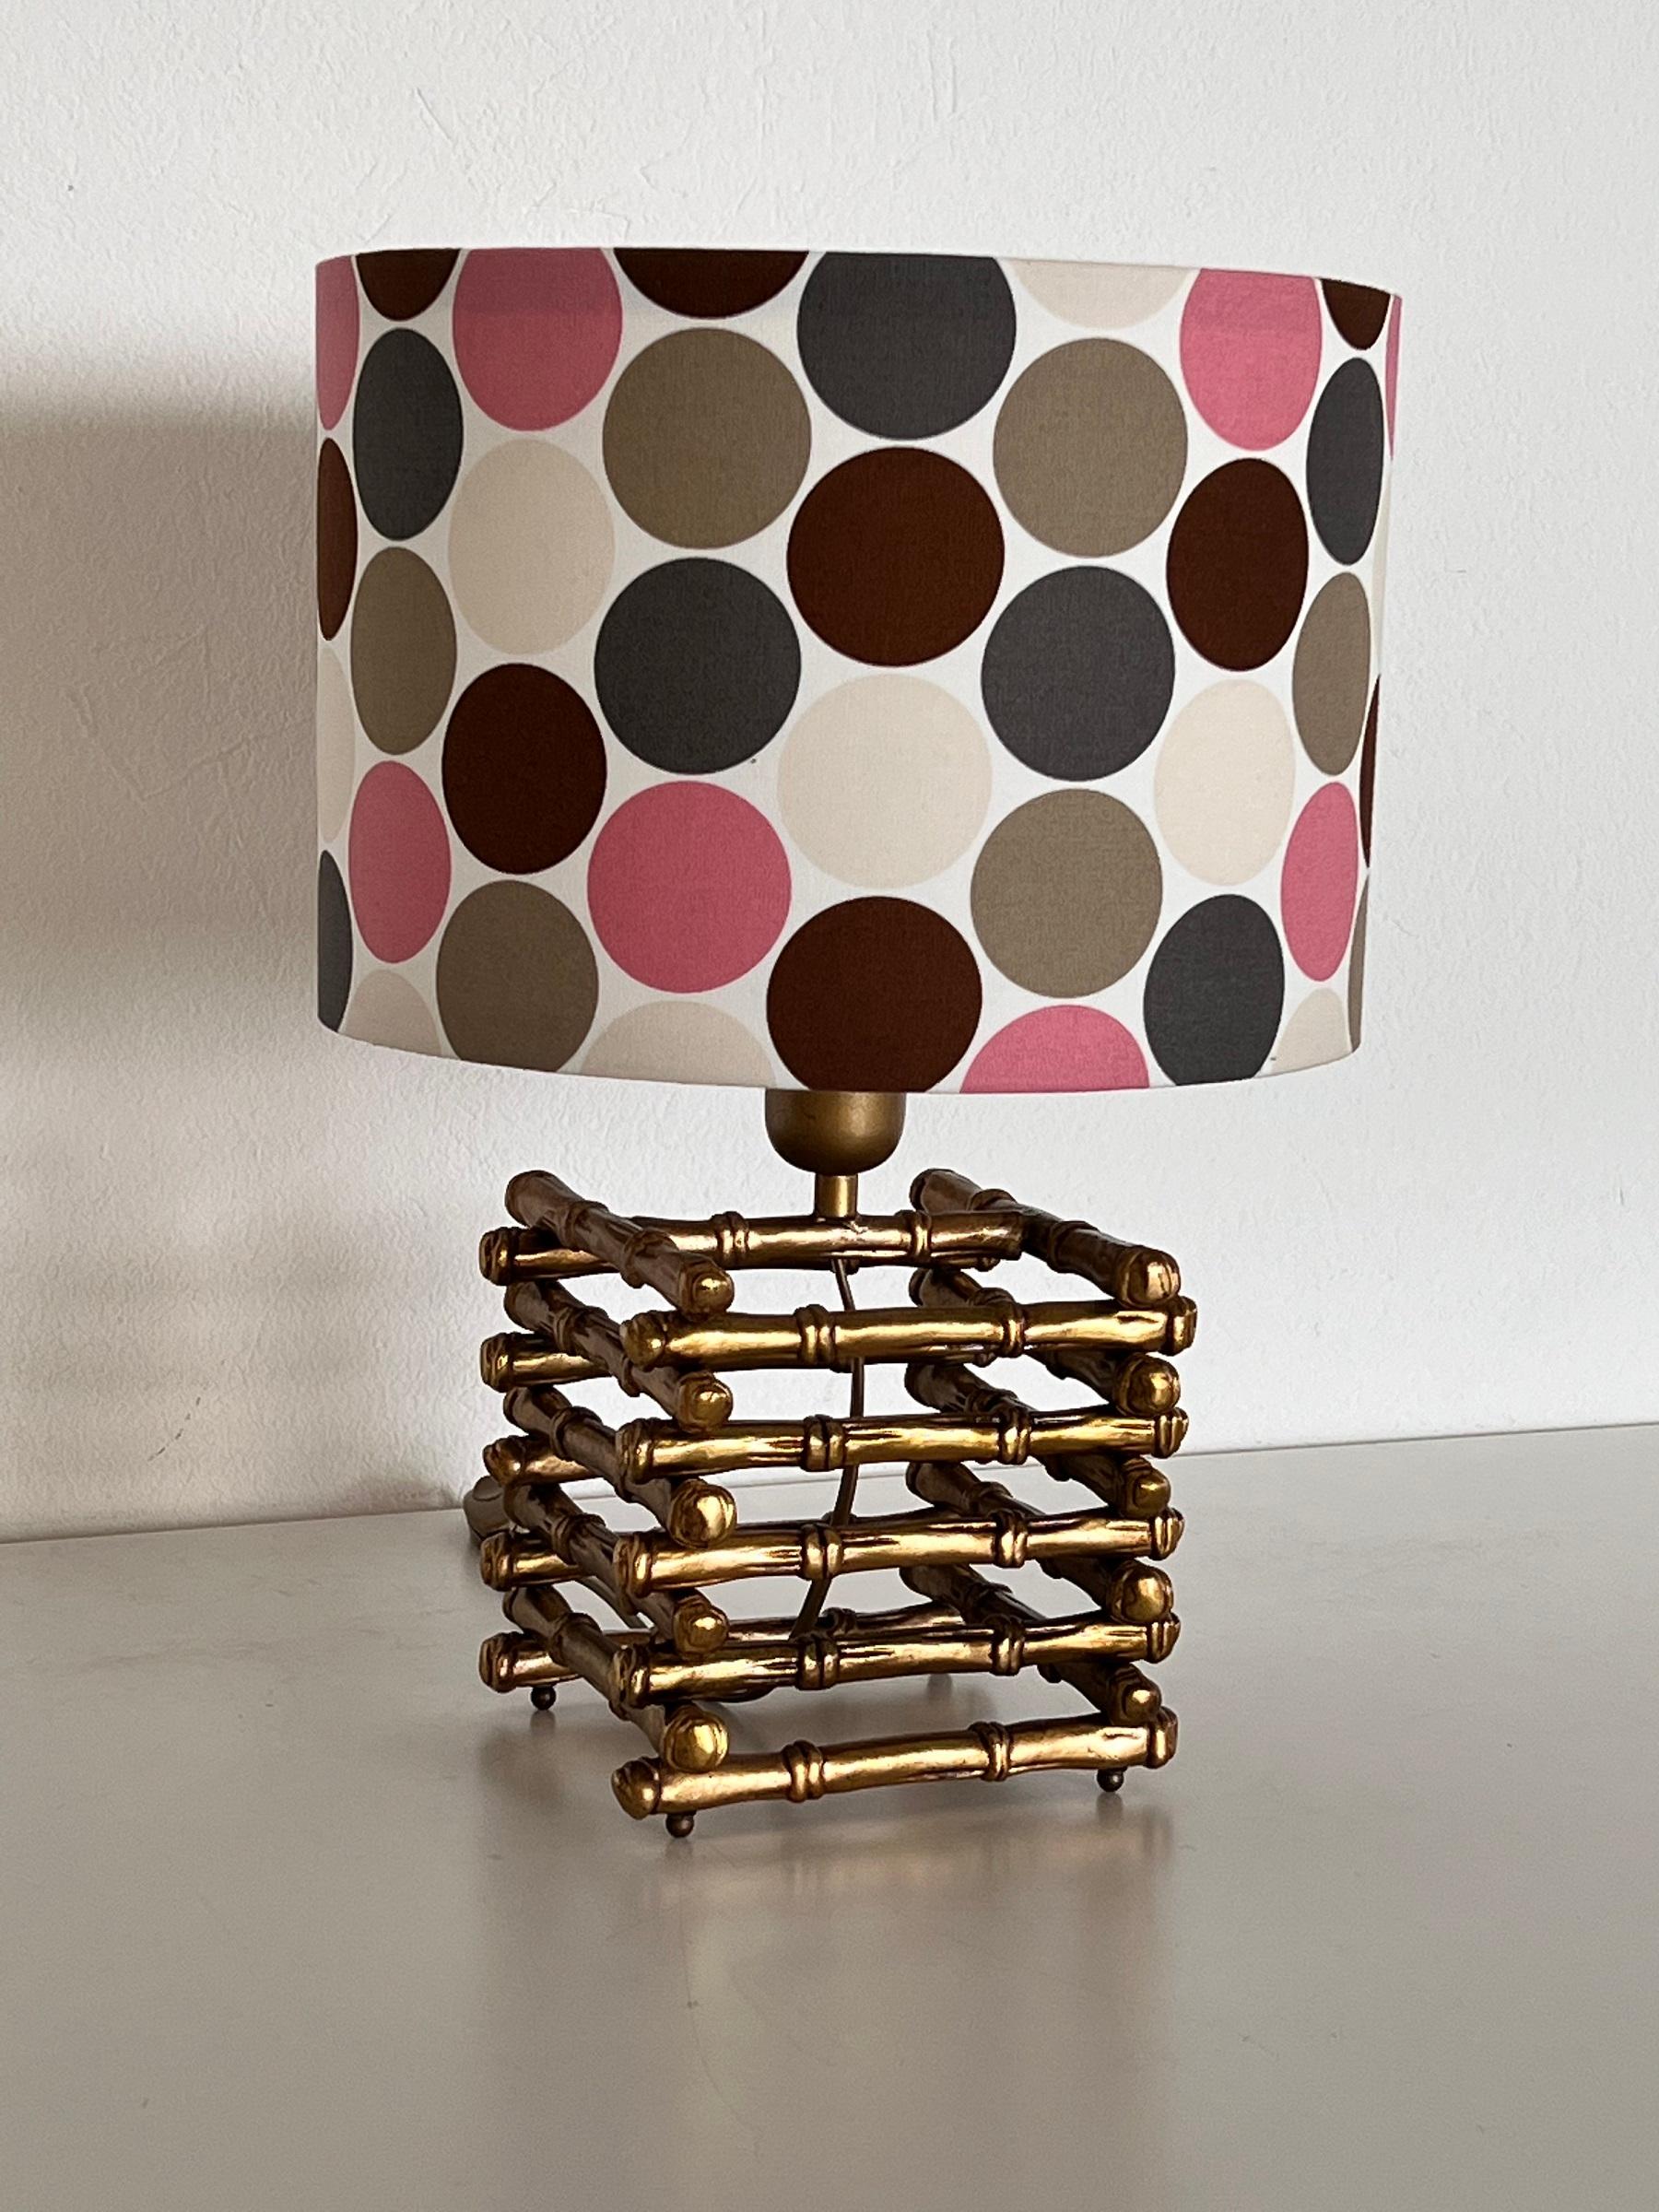 Beautiful table lamp, Made in Italy in the 1970s.
The lamp is made of heavy brass.
It has the shape of bamboo sticks on top of each other, deceptively real.
The lampshade is new and comes free with the lamp, but can be omitted if desired.
Equipped